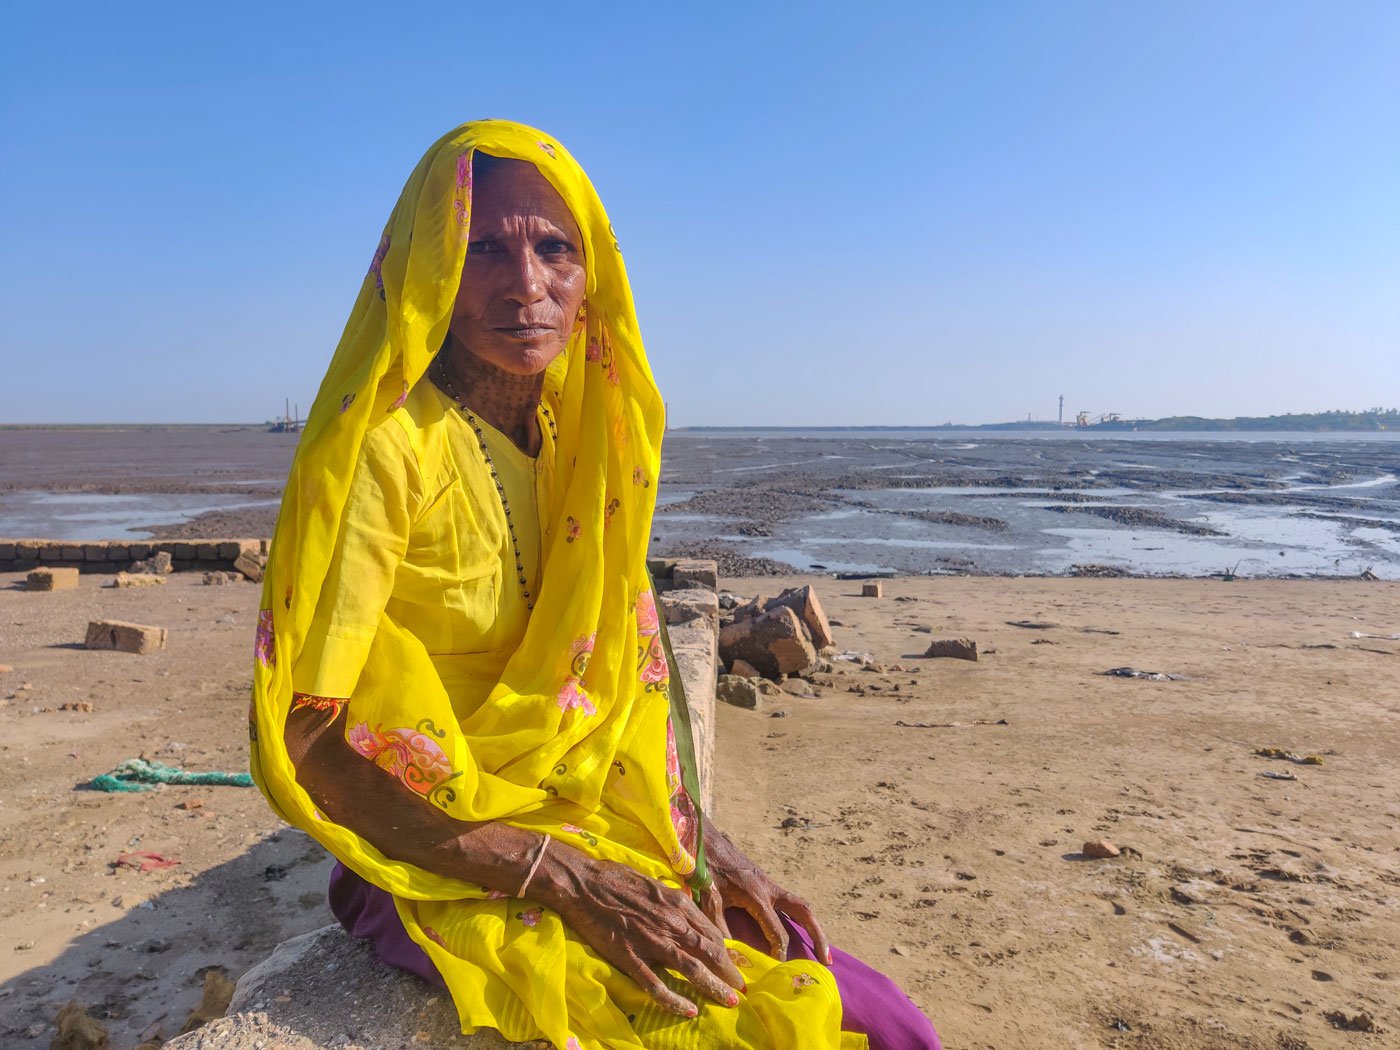 Jamnaben's husband Sanabhai was on a small fishing boat which broke down in the middle of the Arabian Sea. He passed away before help could reach him